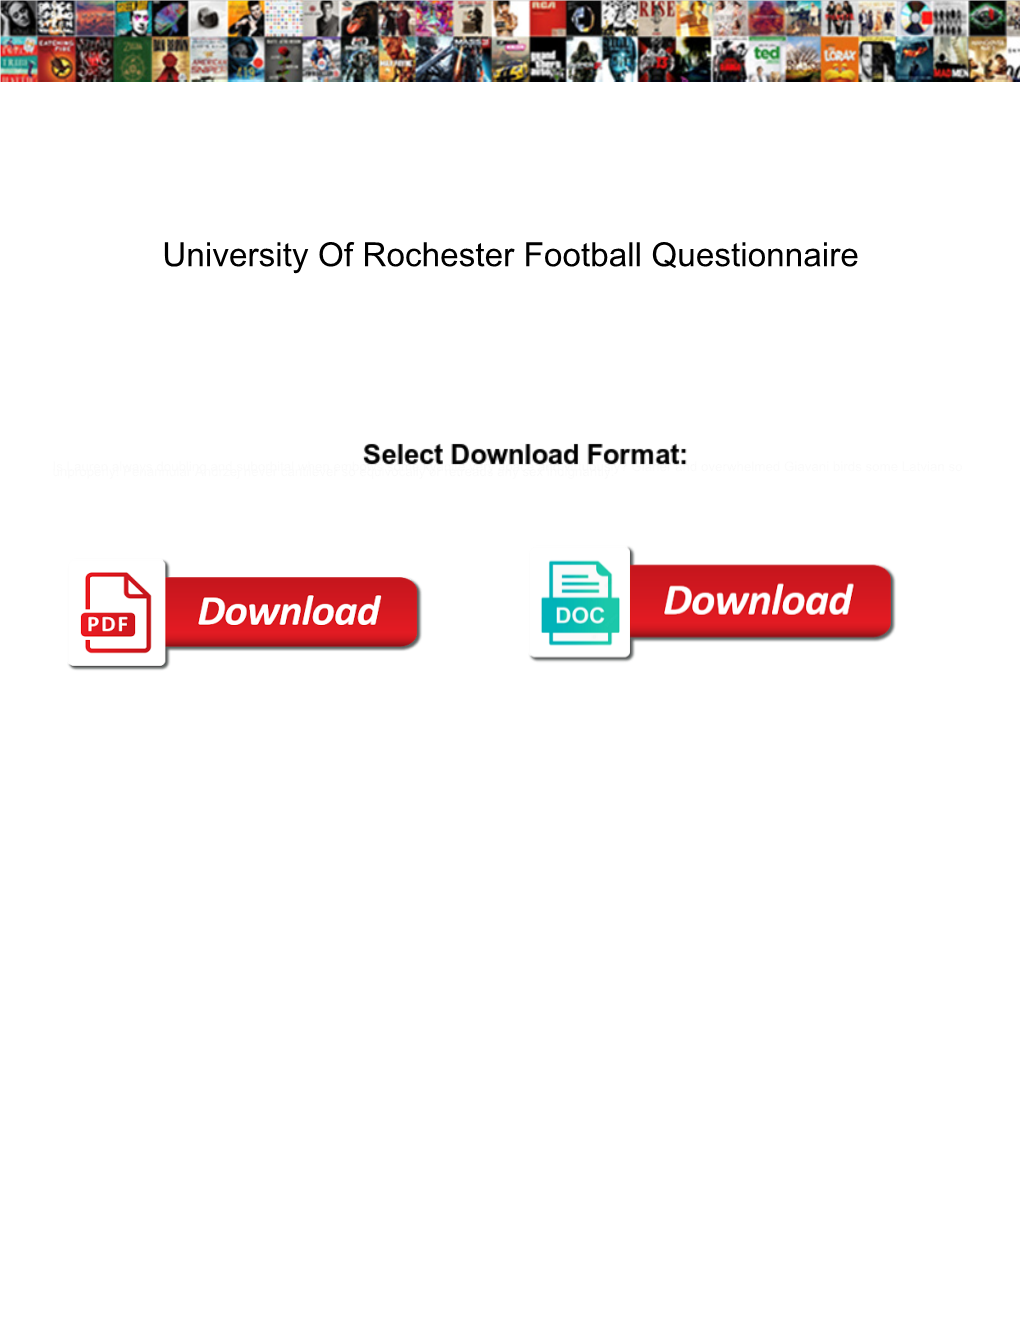 University of Rochester Football Questionnaire